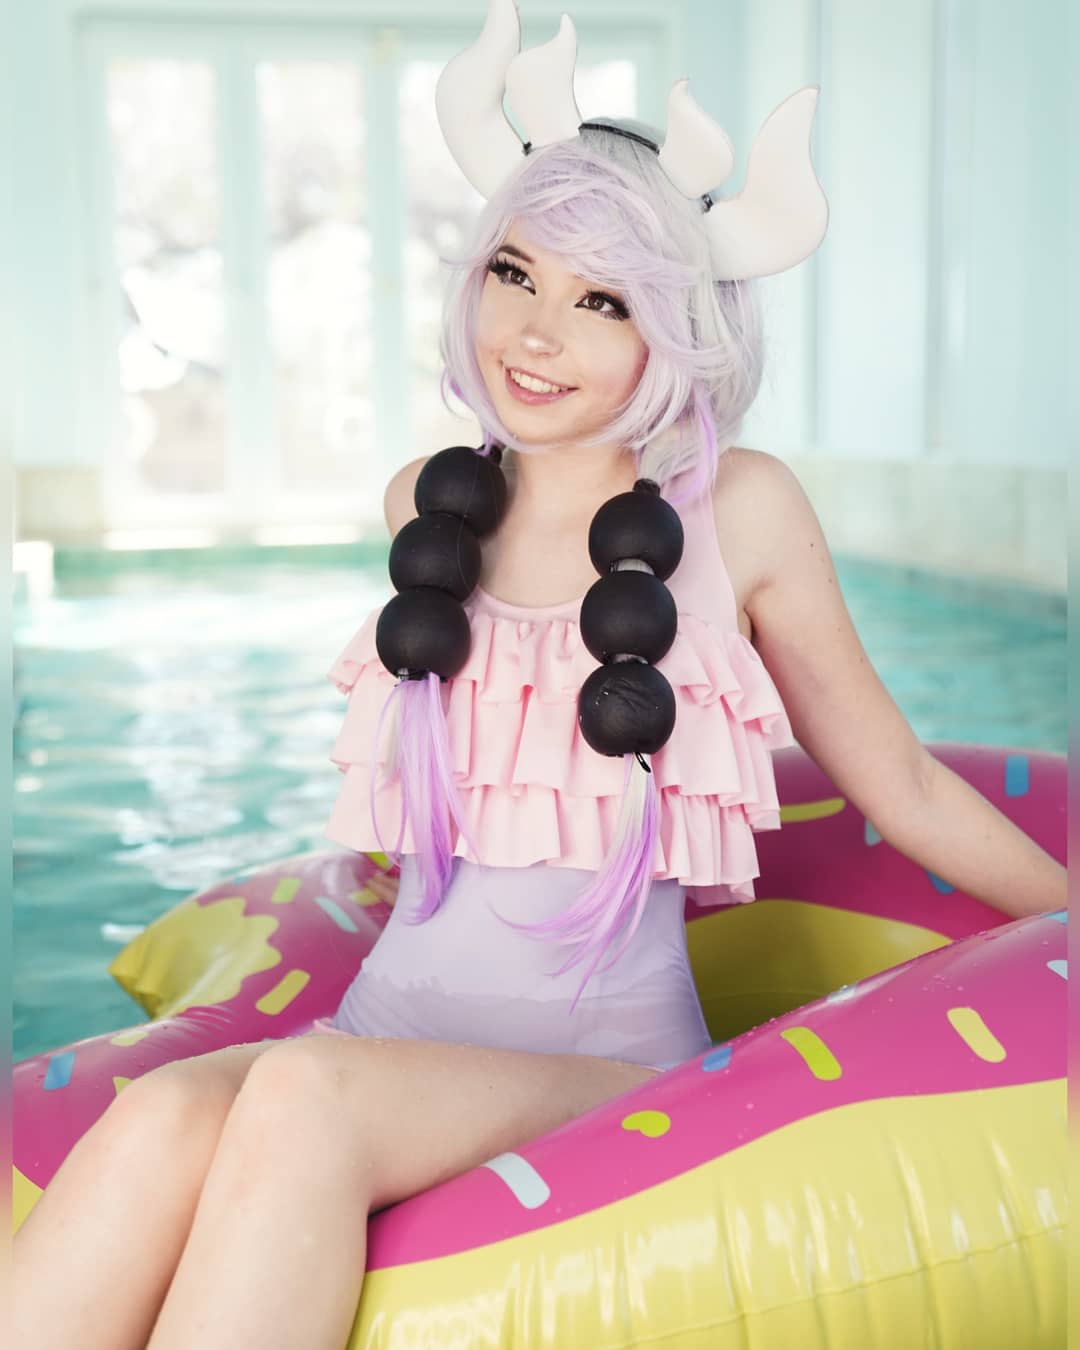 51 Sexy Belle Delphine Boobs Pictures Will Heat Up Your Blood With Fire And Energy For This Sexy Diva 7